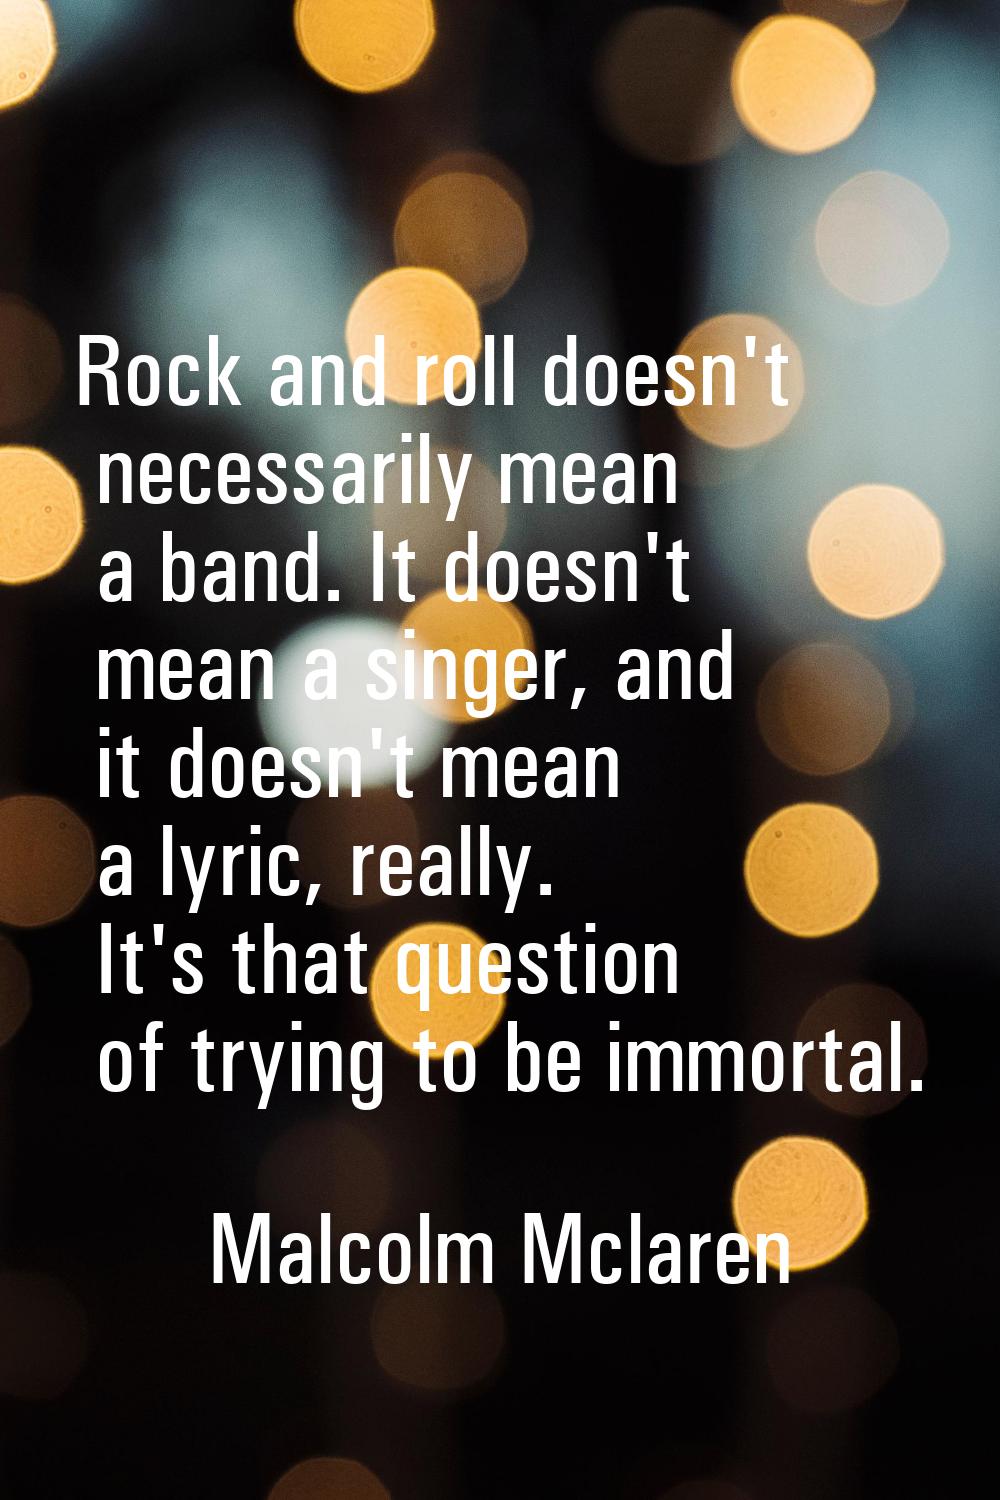 Rock and roll doesn't necessarily mean a band. It doesn't mean a singer, and it doesn't mean a lyri